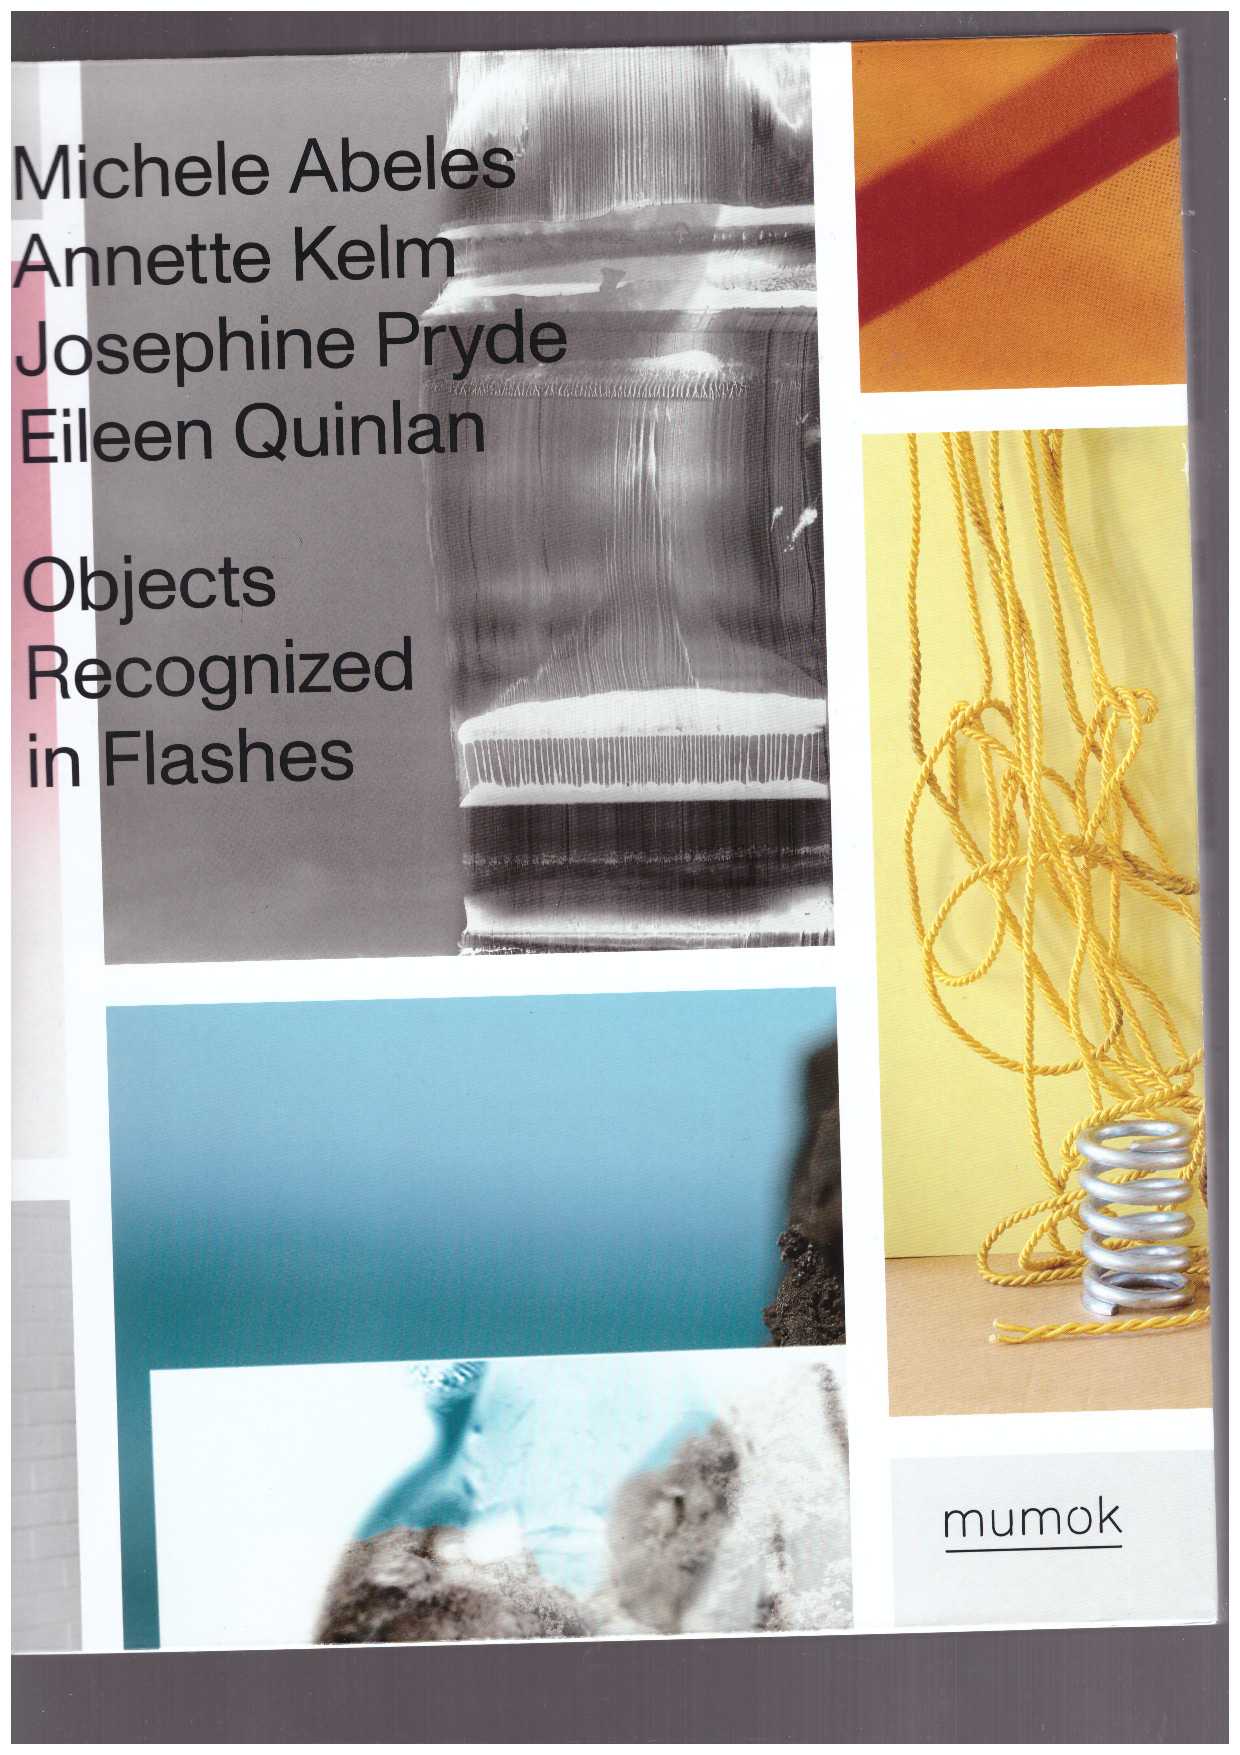 ABELES, Michele; KELM, Annette; PRYDE, Josephine; QUINLAN, Eileen - Objects Recognized in Flashes